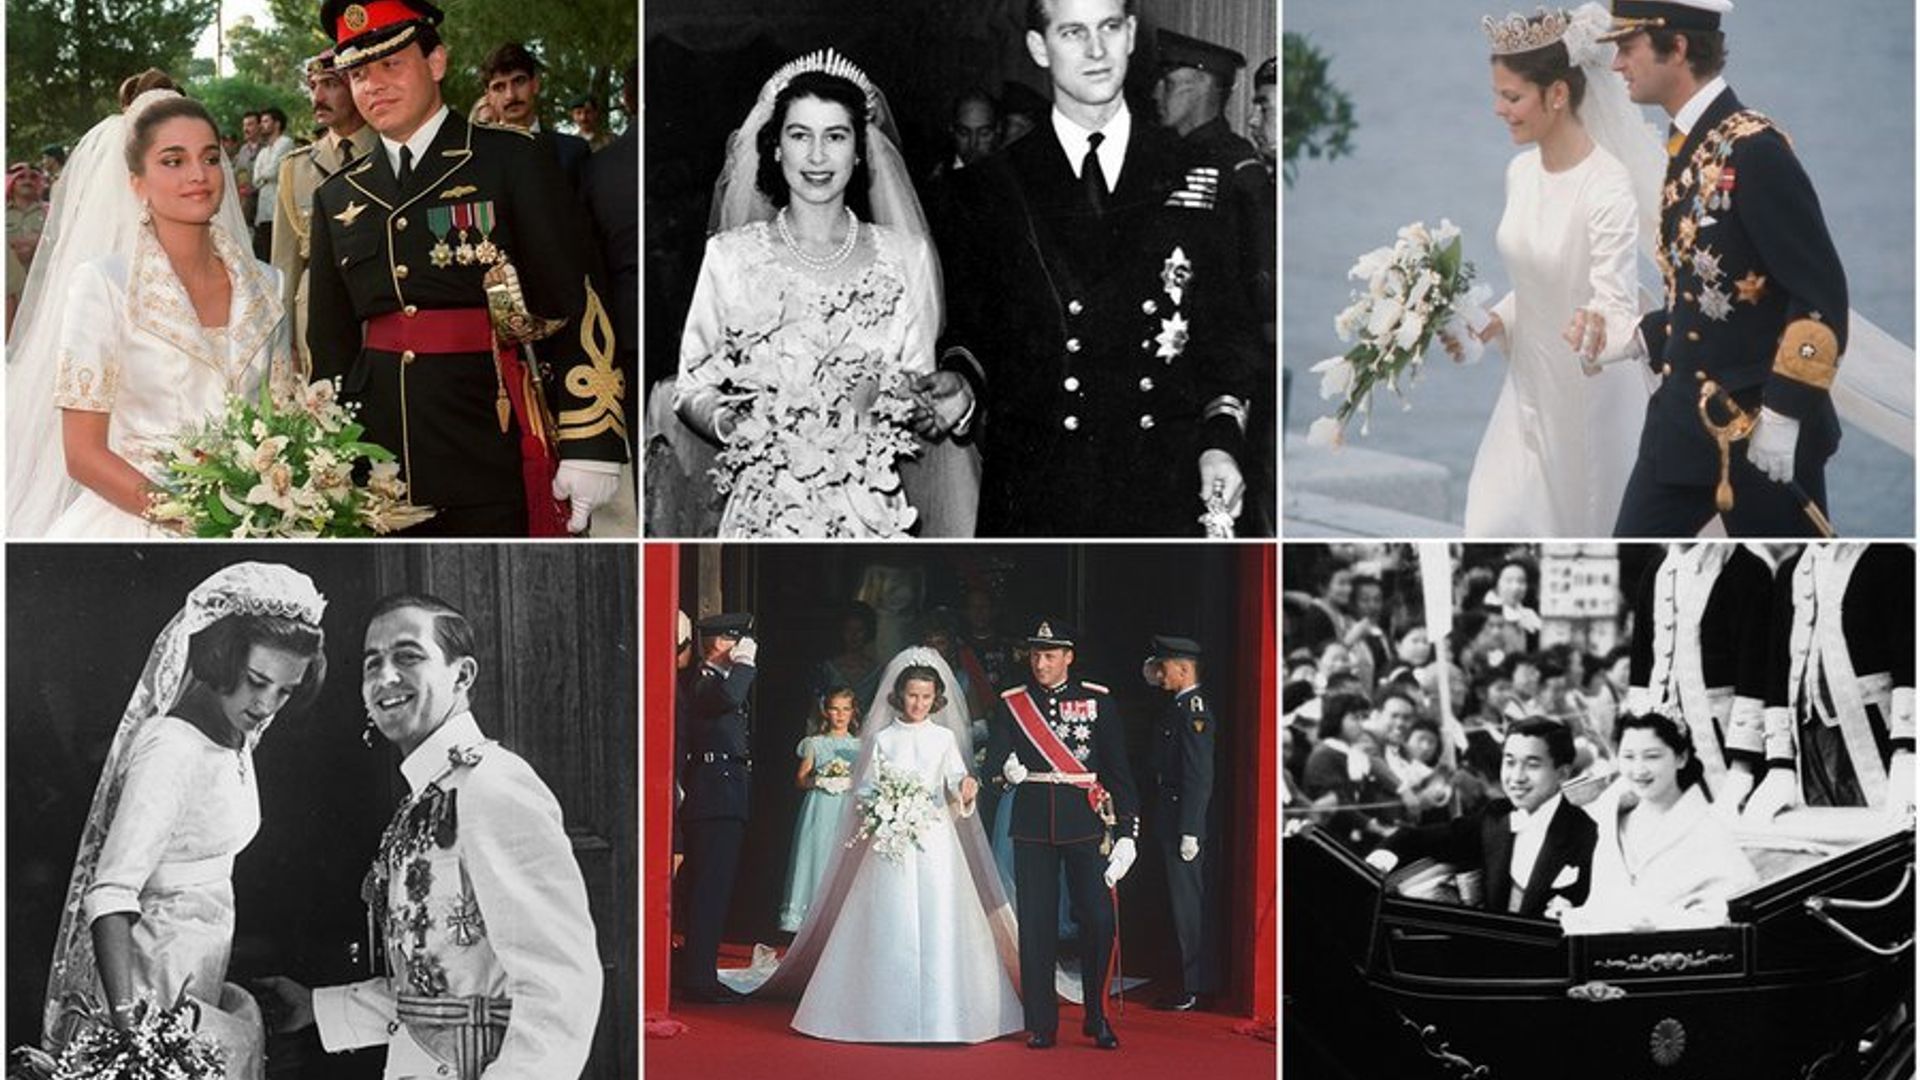 Royal weddings: Long-lasting married couples from royalty then and now